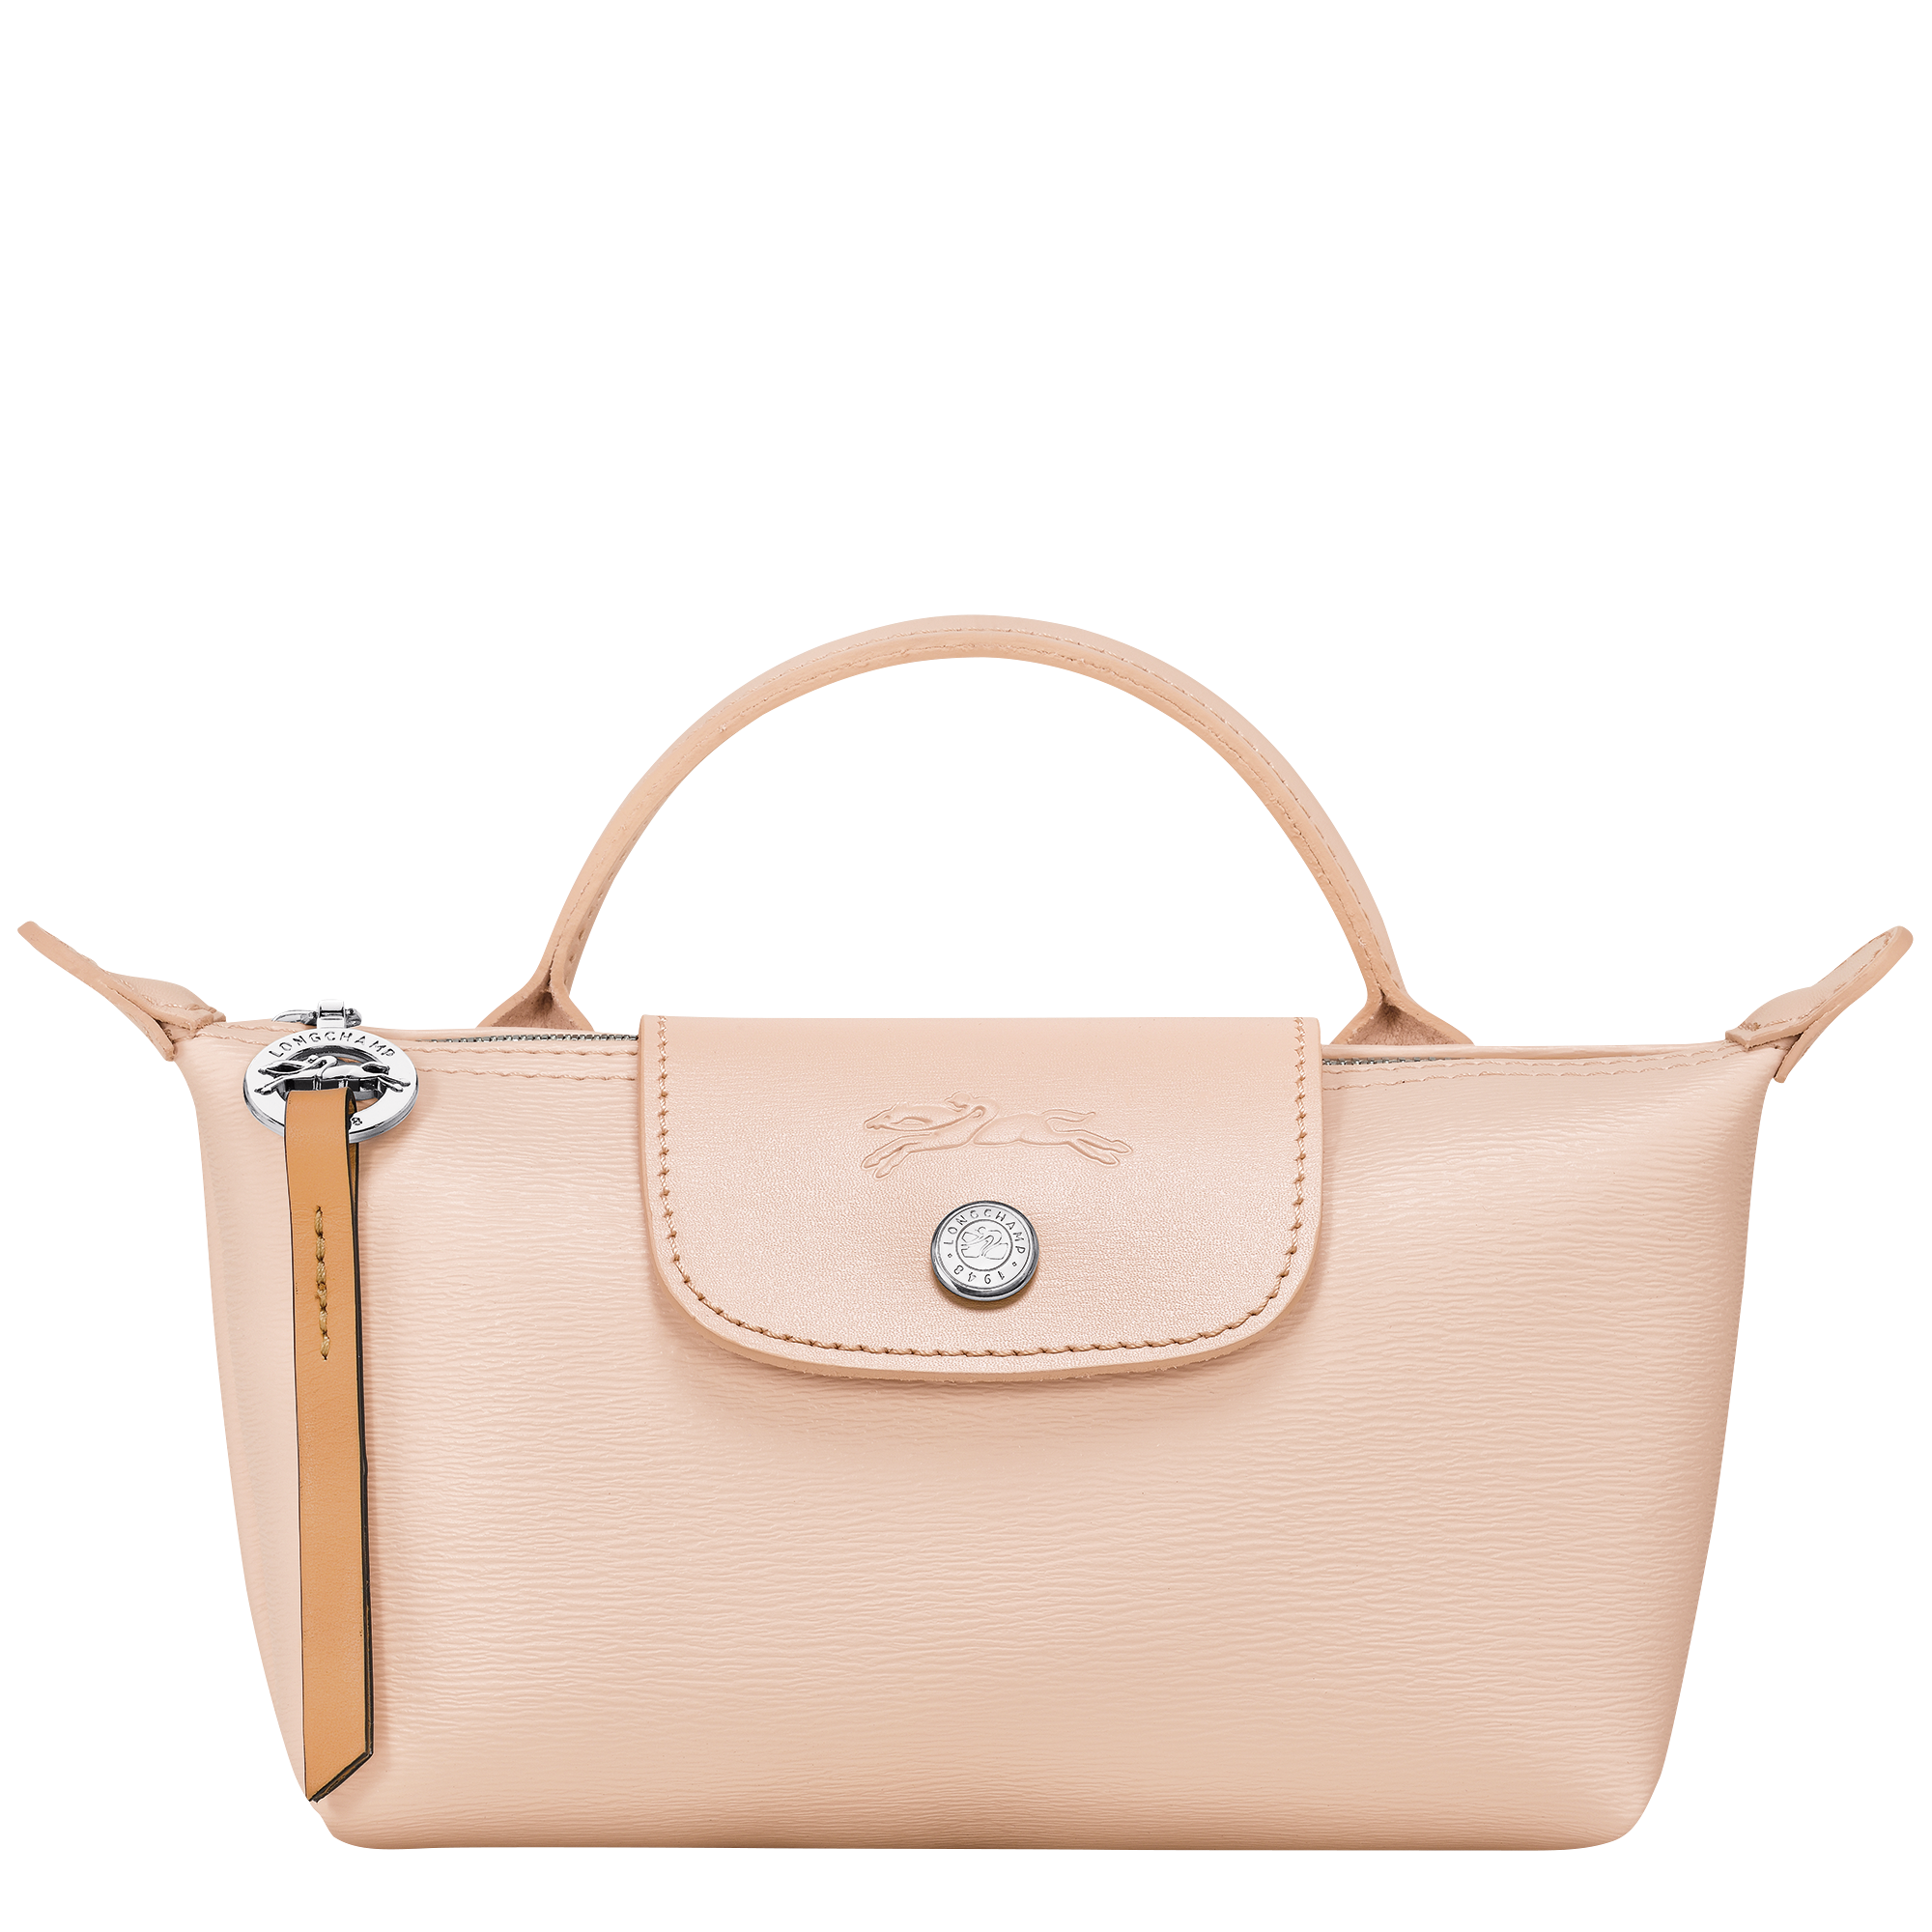 Longchamp LE PLIAGE CITY - Pouch with handle in Nude - 1 (SKU: 34175HYQ542)